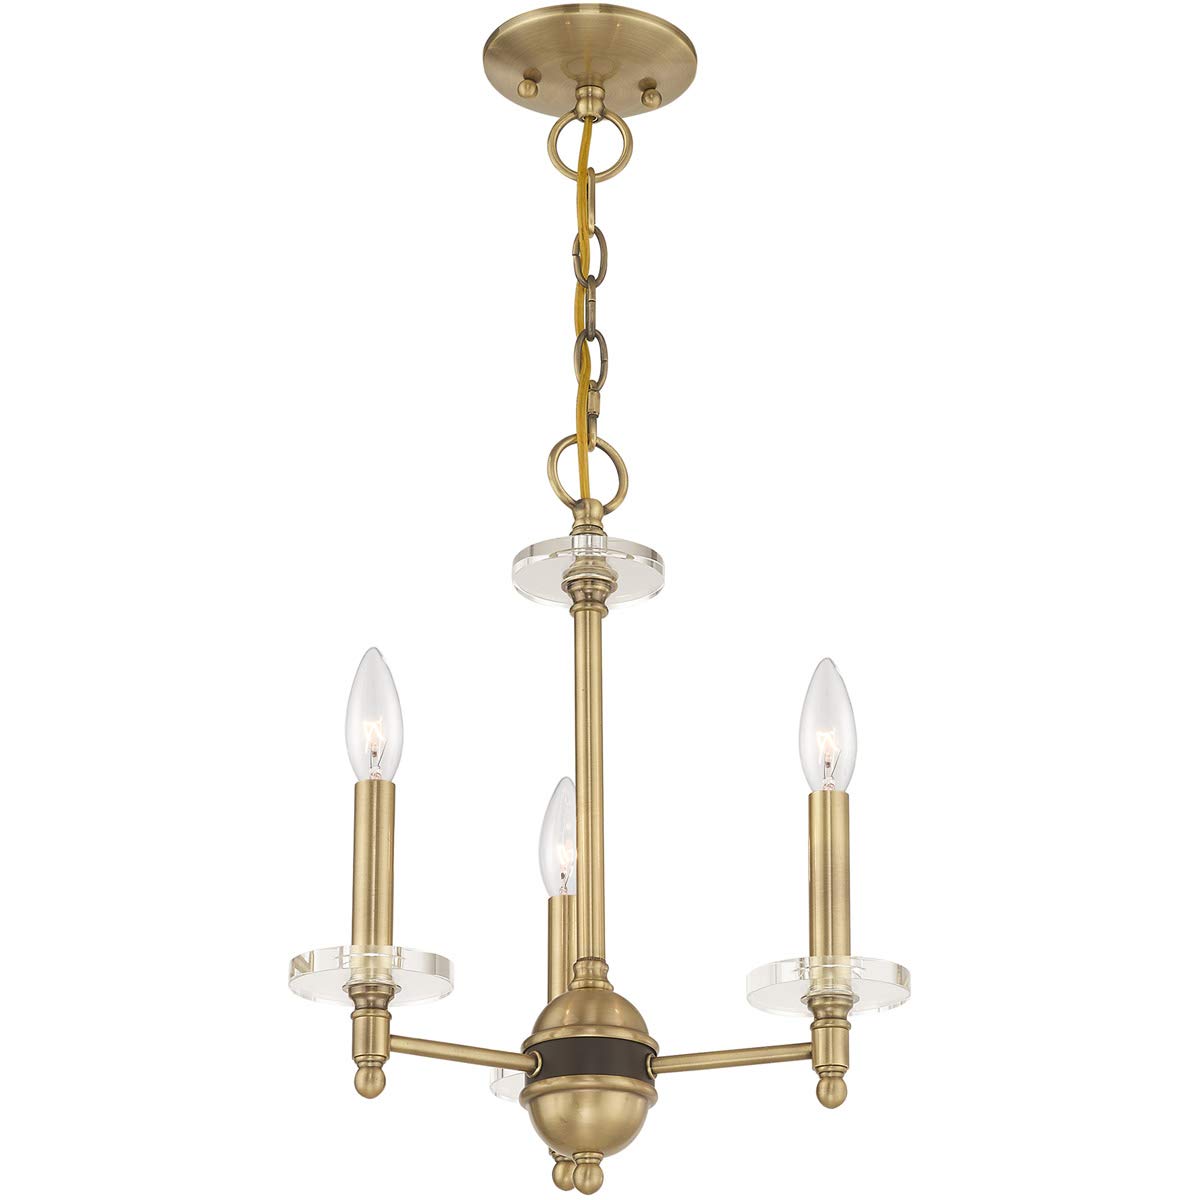 Livex Lighting 42703-01 Bancroft - Three Light Mini Chandelier, Antique Brass Finish with Clear Bobeche Crystal